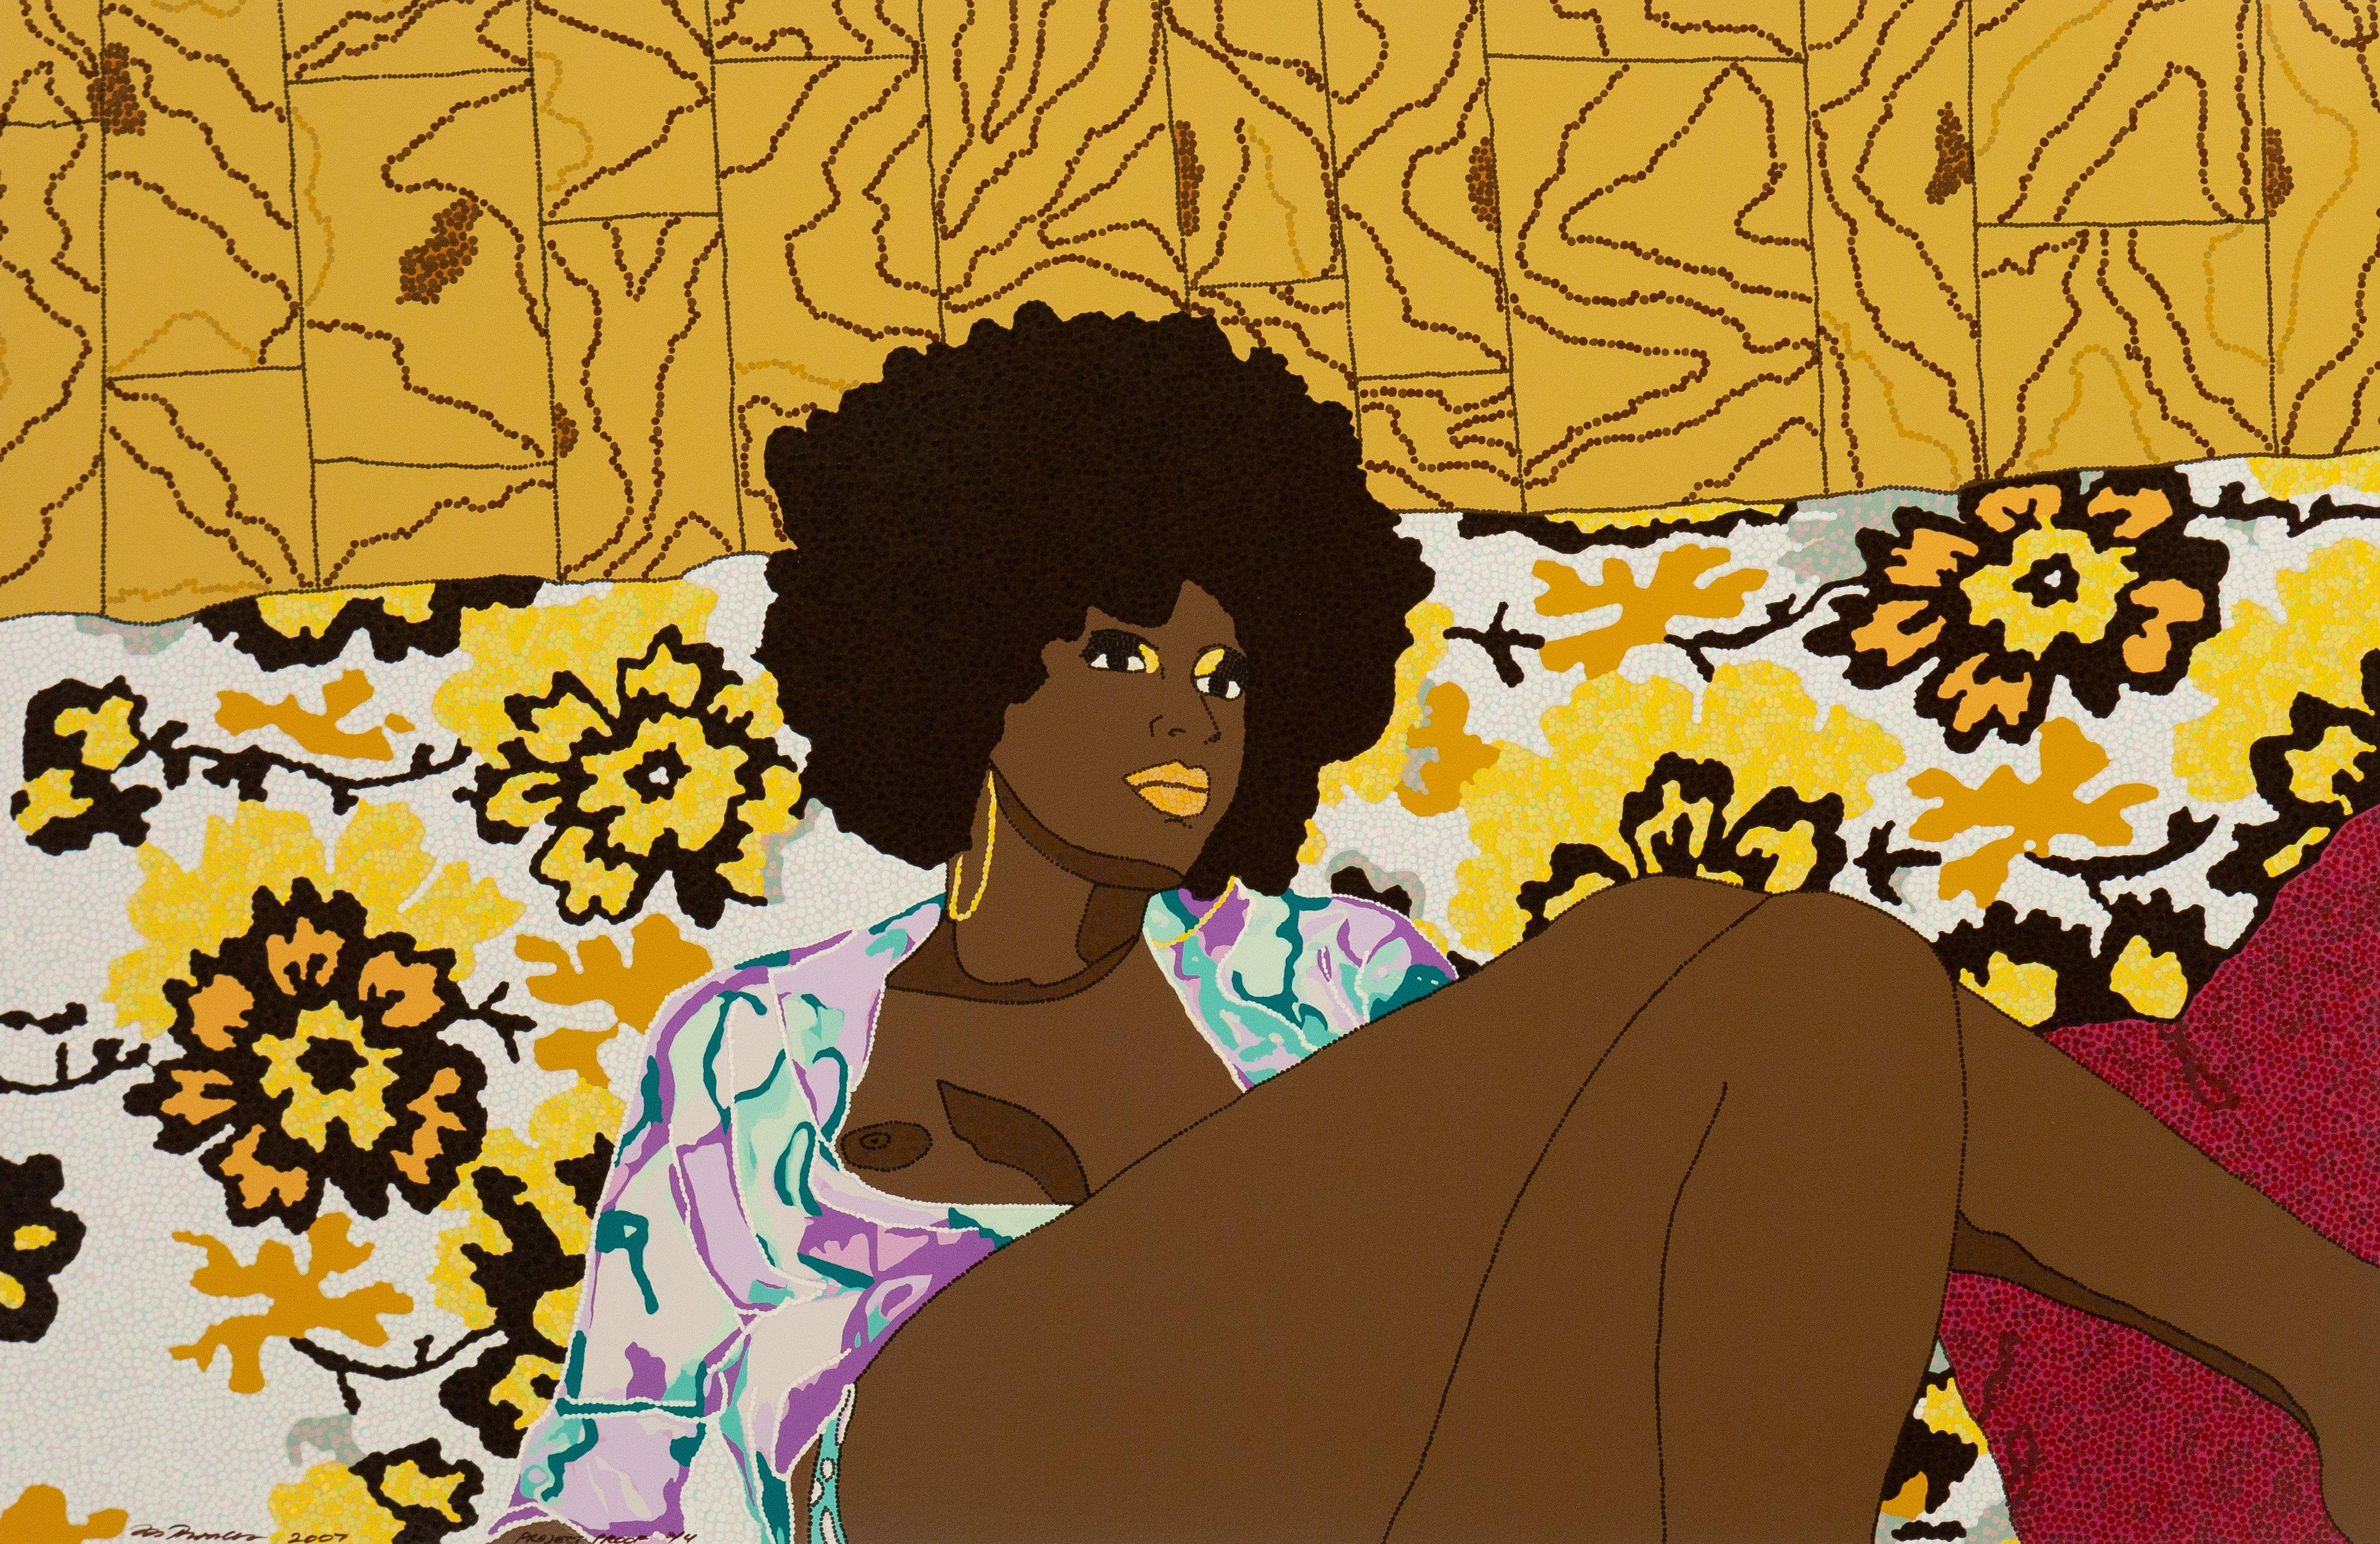 Why Can't We Just Sit Down and Talk It Over? - Print by Mickalene Thomas